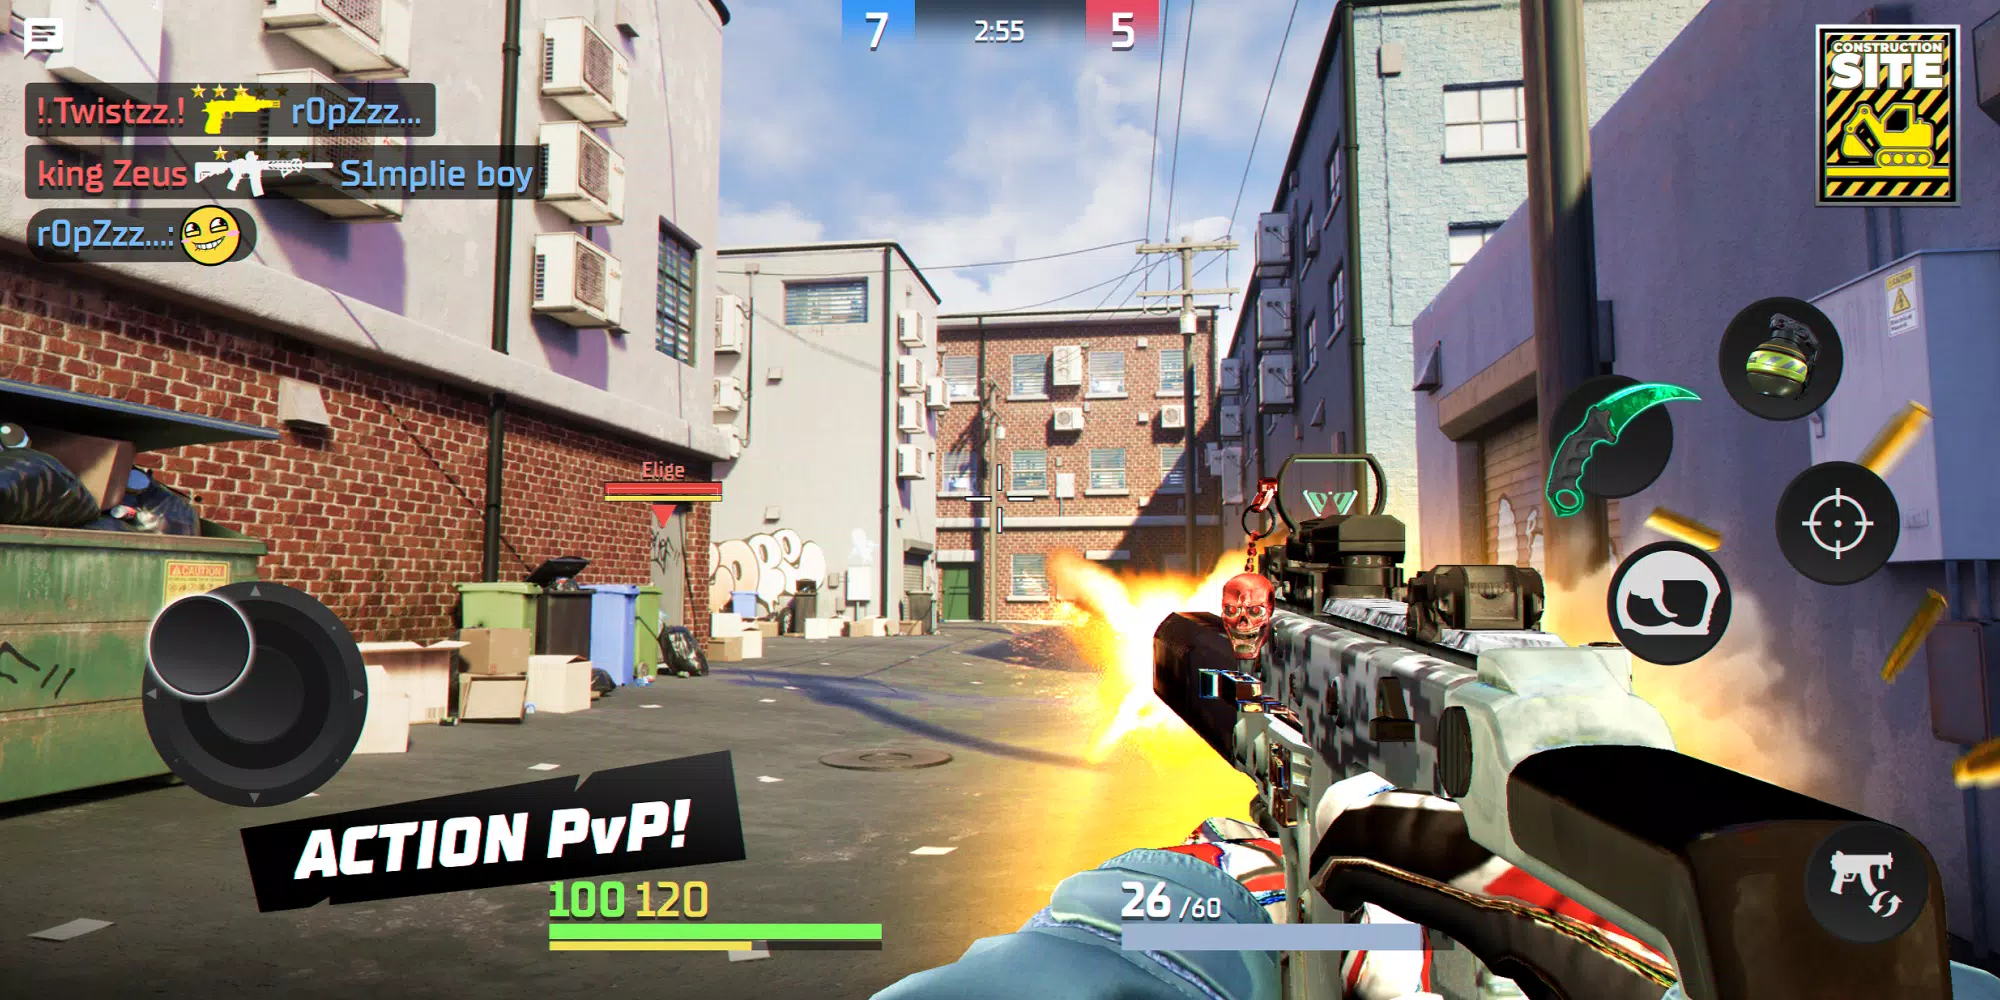 FPS Online Strike: PVP Shooter for Android - Download the APK from Uptodown